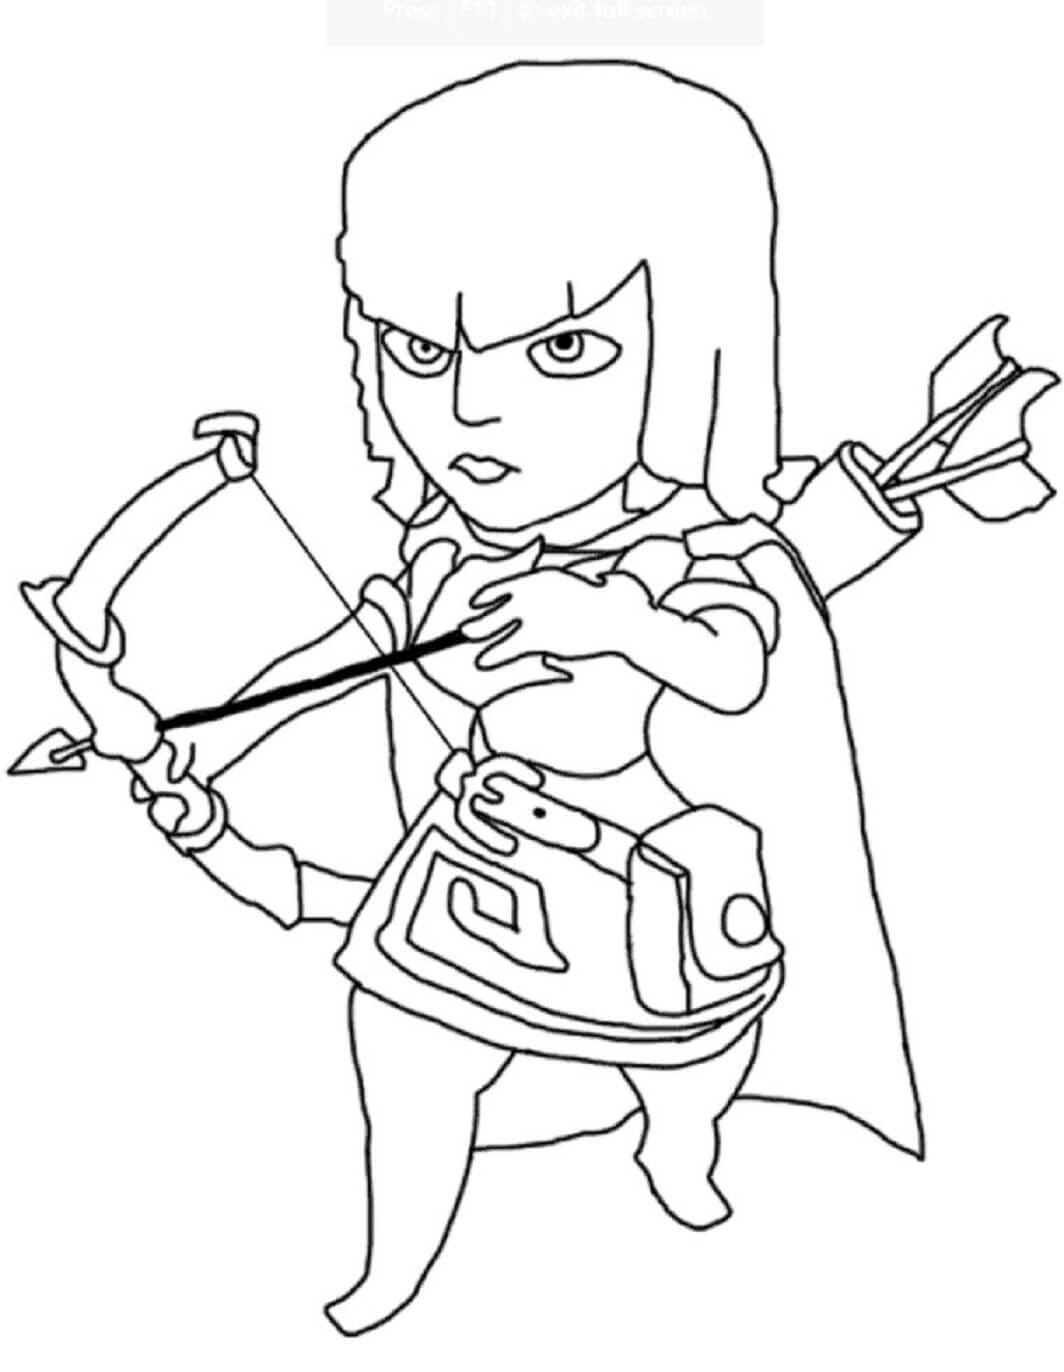 Archer Clash of Clans coloring page